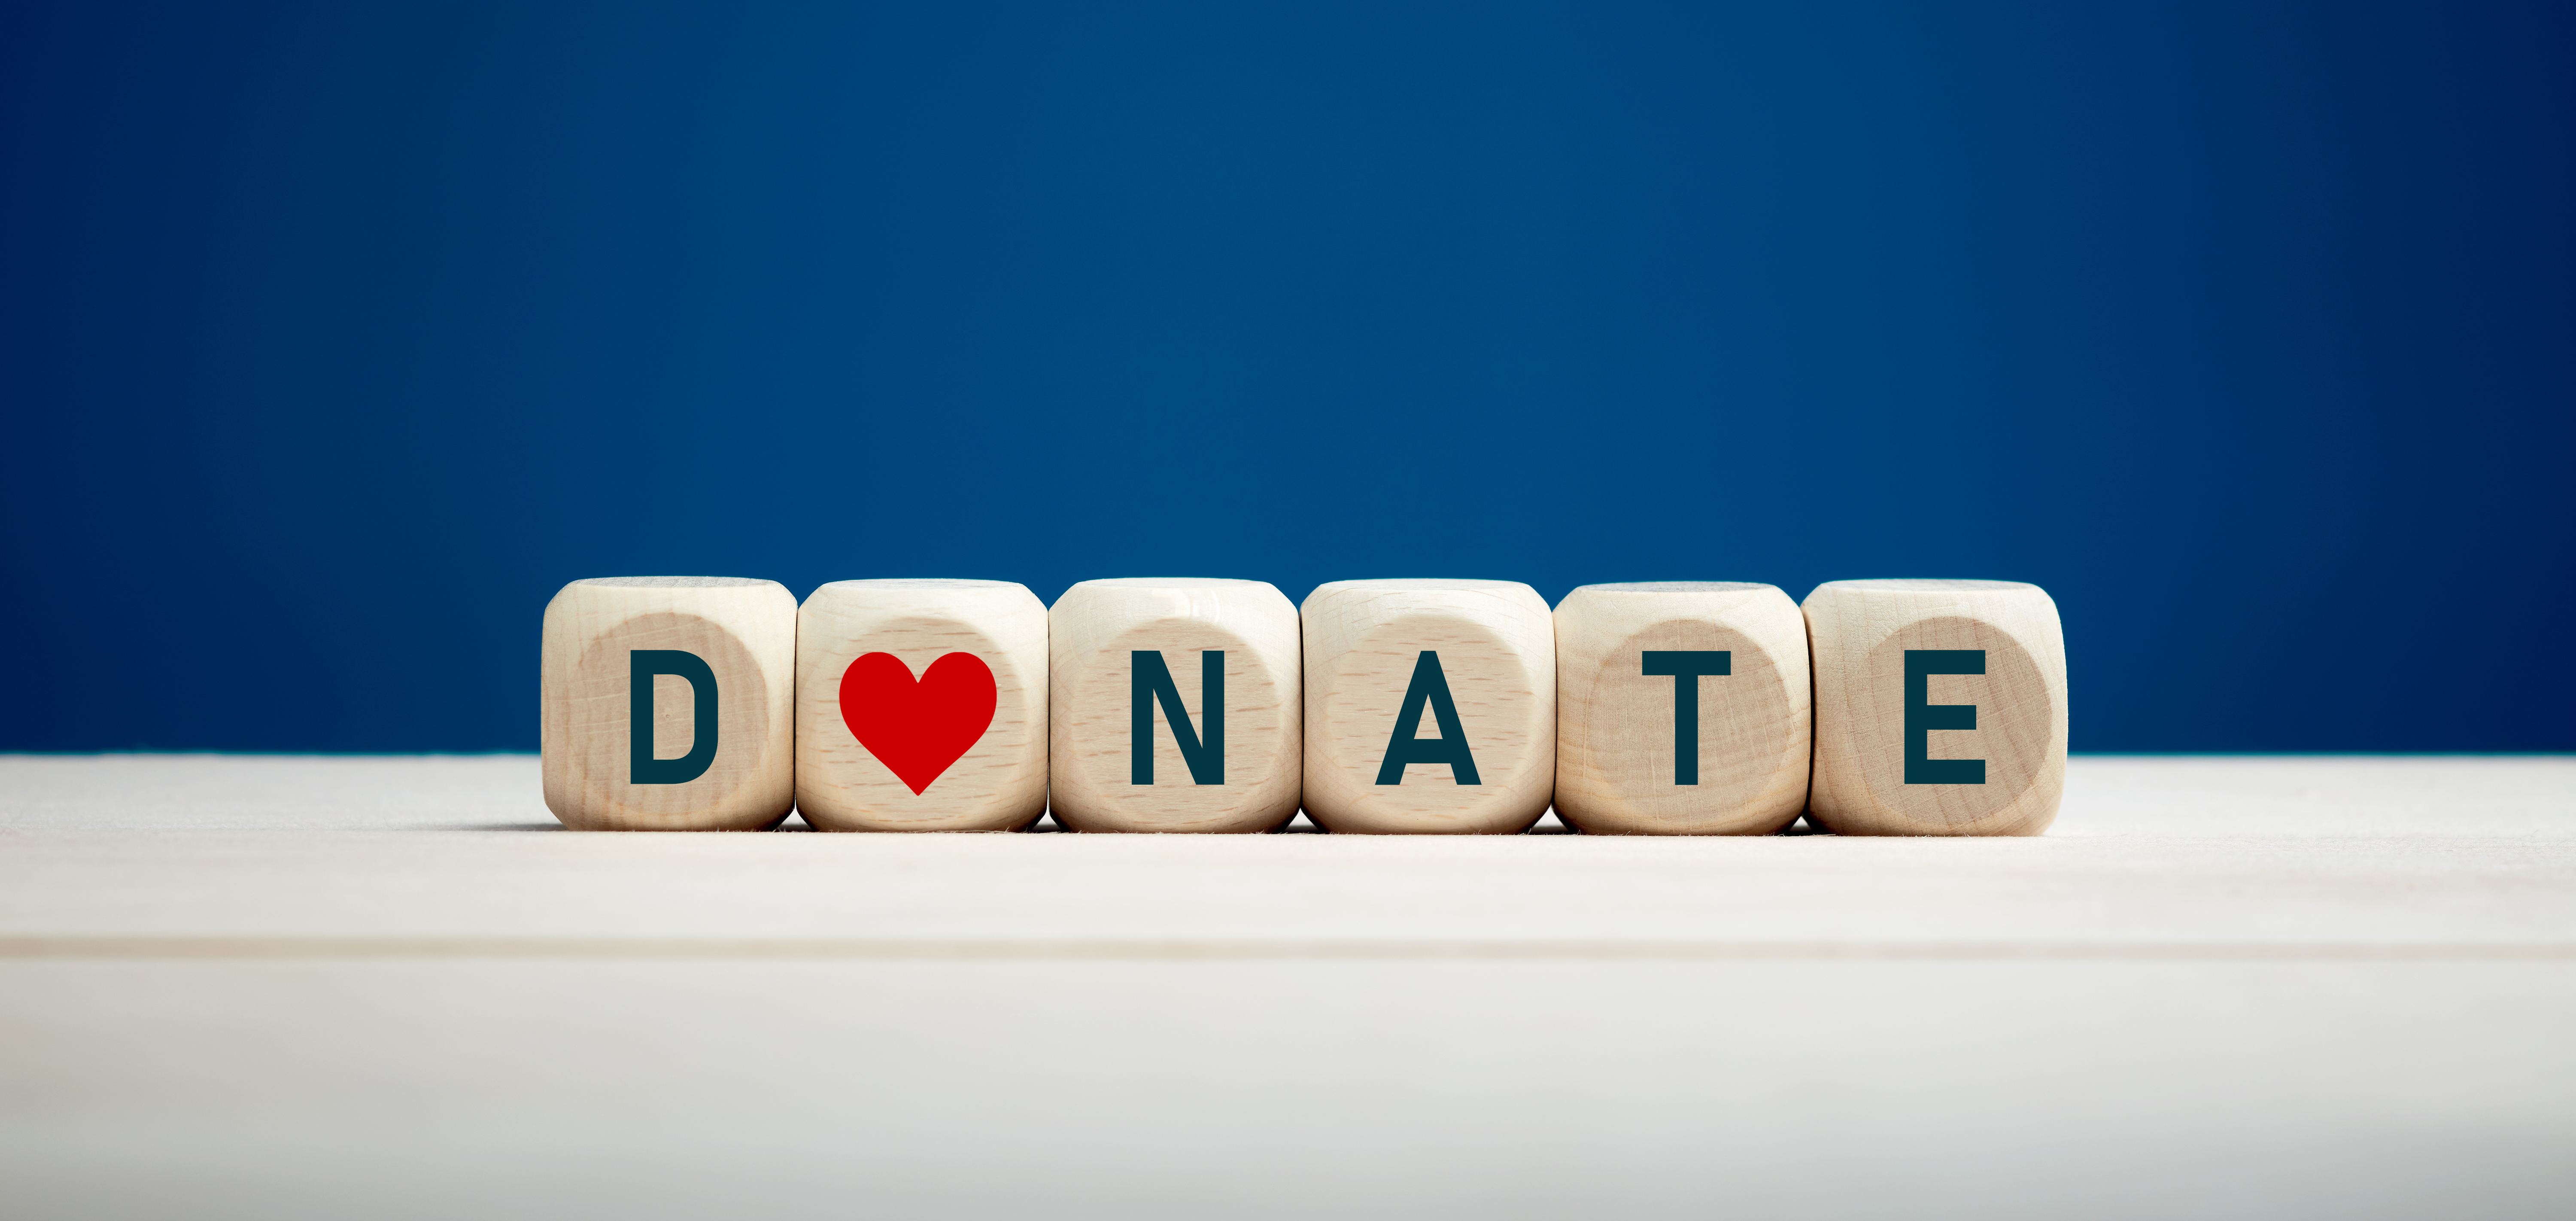 7 Tips For Building Ongoing Donor Relationships for Your Theatre